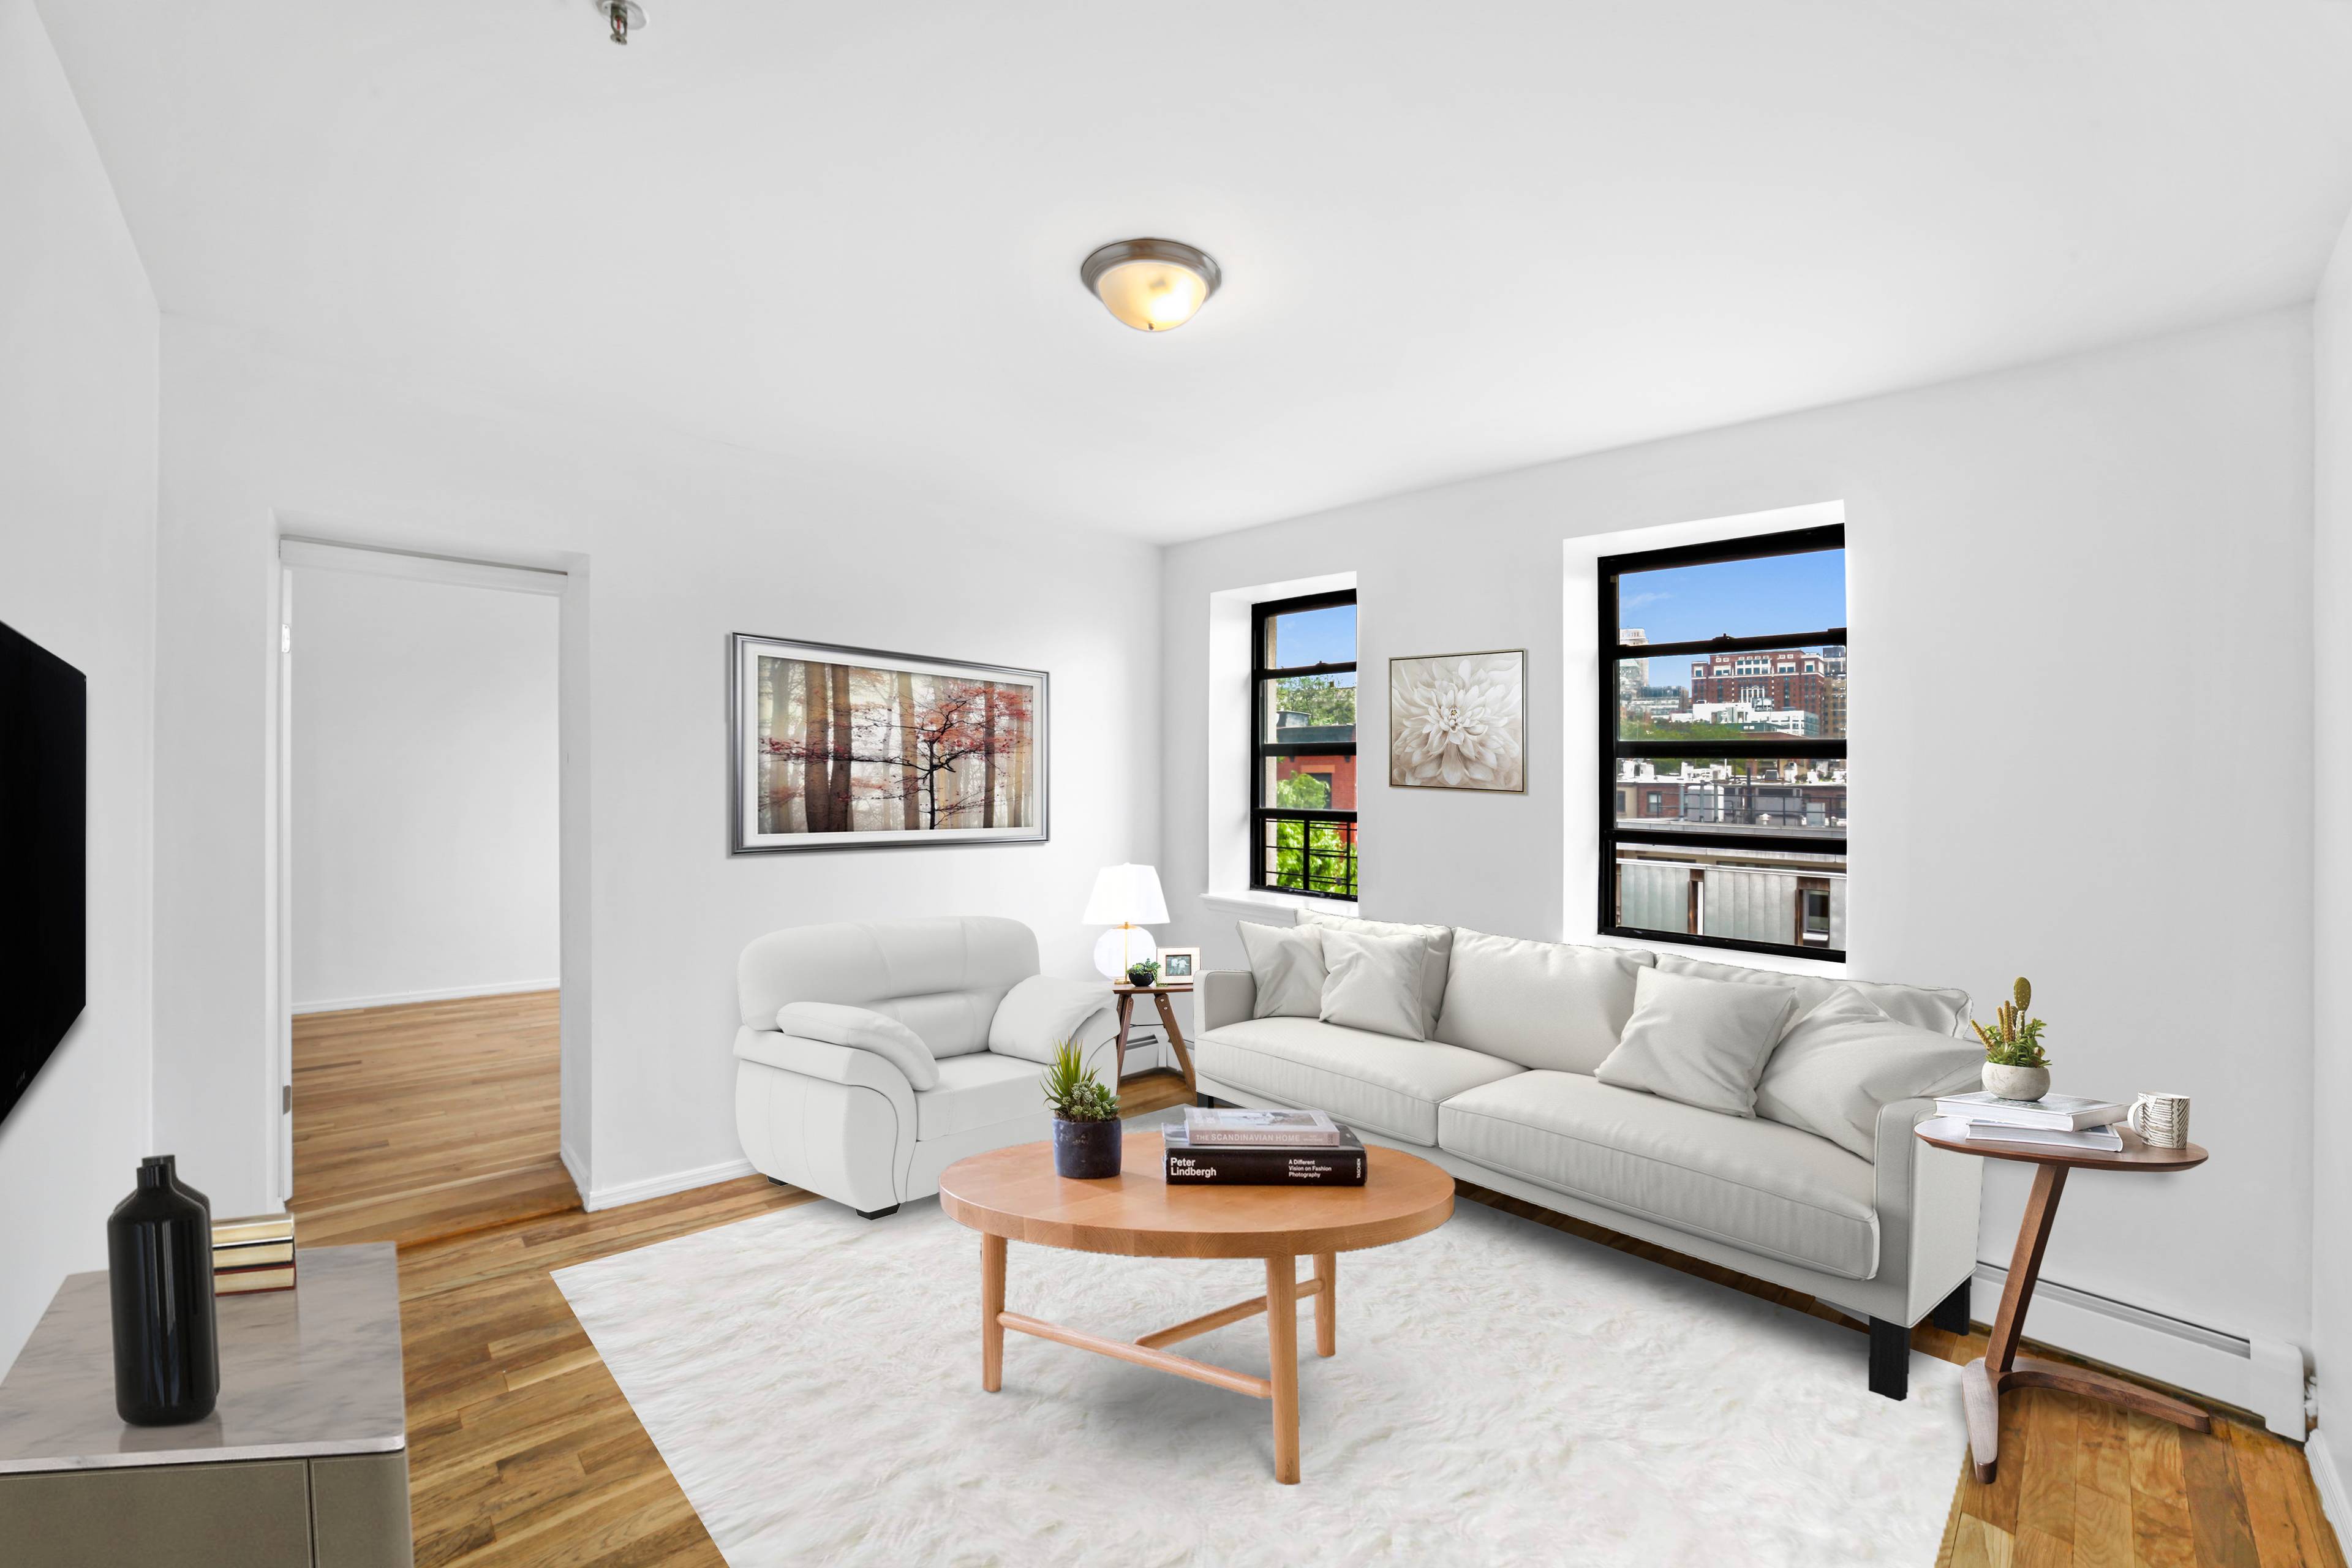 New to the market, Upcoming renovated 2 bedroom Prime Cobble Hill apartment situated between Smith and Court Street, right off the Bergen F amp ; G train stops.